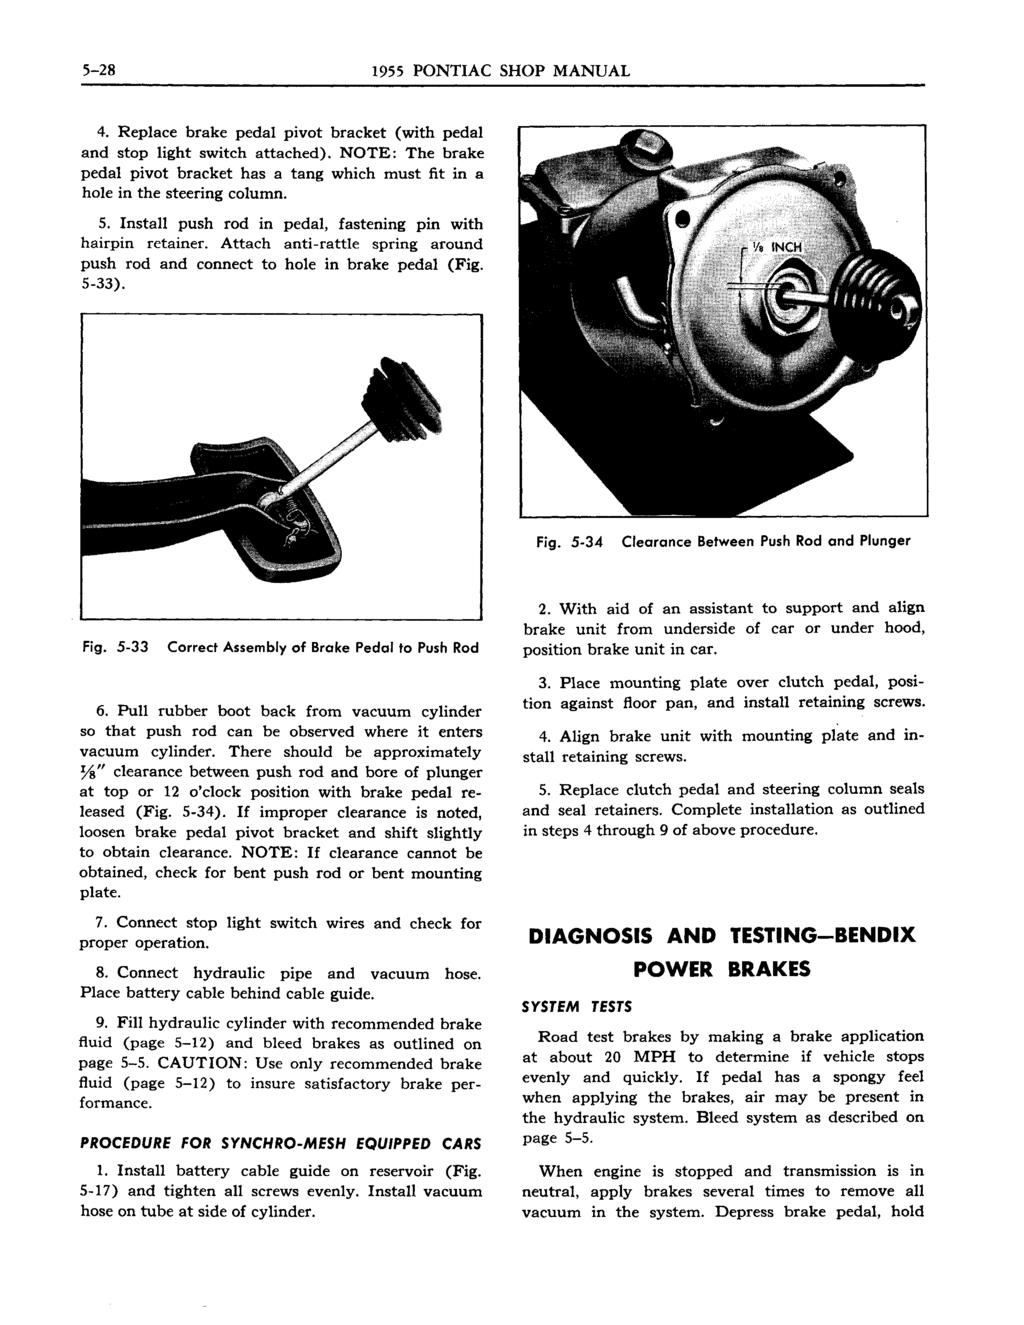 5-28 1955 PONTIAC SHOP MANUAL 4. Replace brake pedal pivot bracket (with pedal and stop light switch attached).